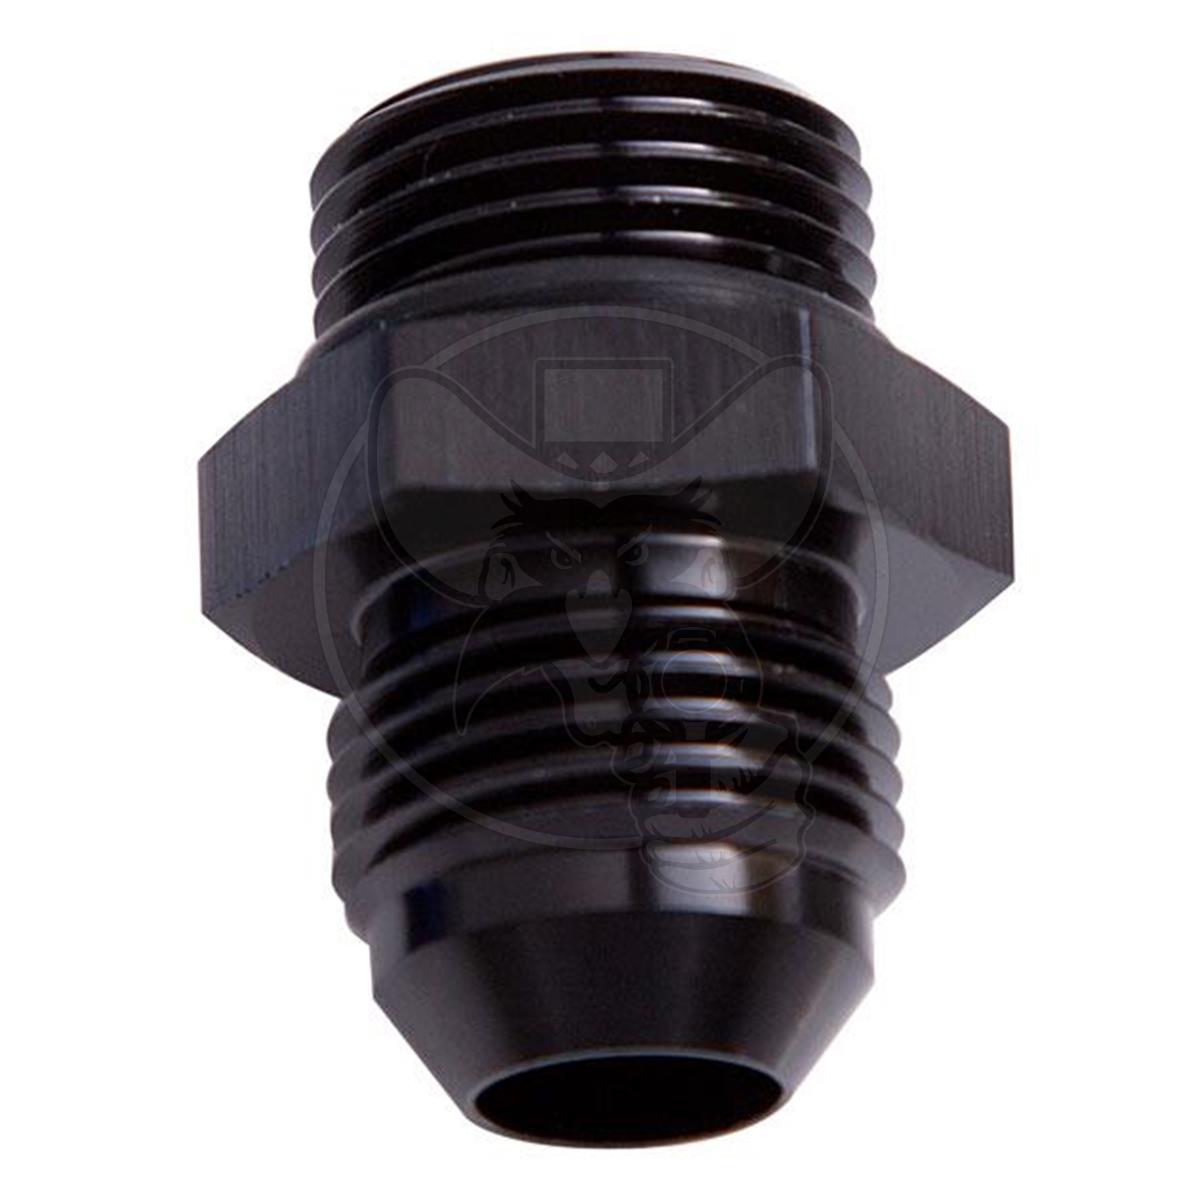 Aeroflow -8 ORB to -6AN Straight Male Flare Adapter - Black